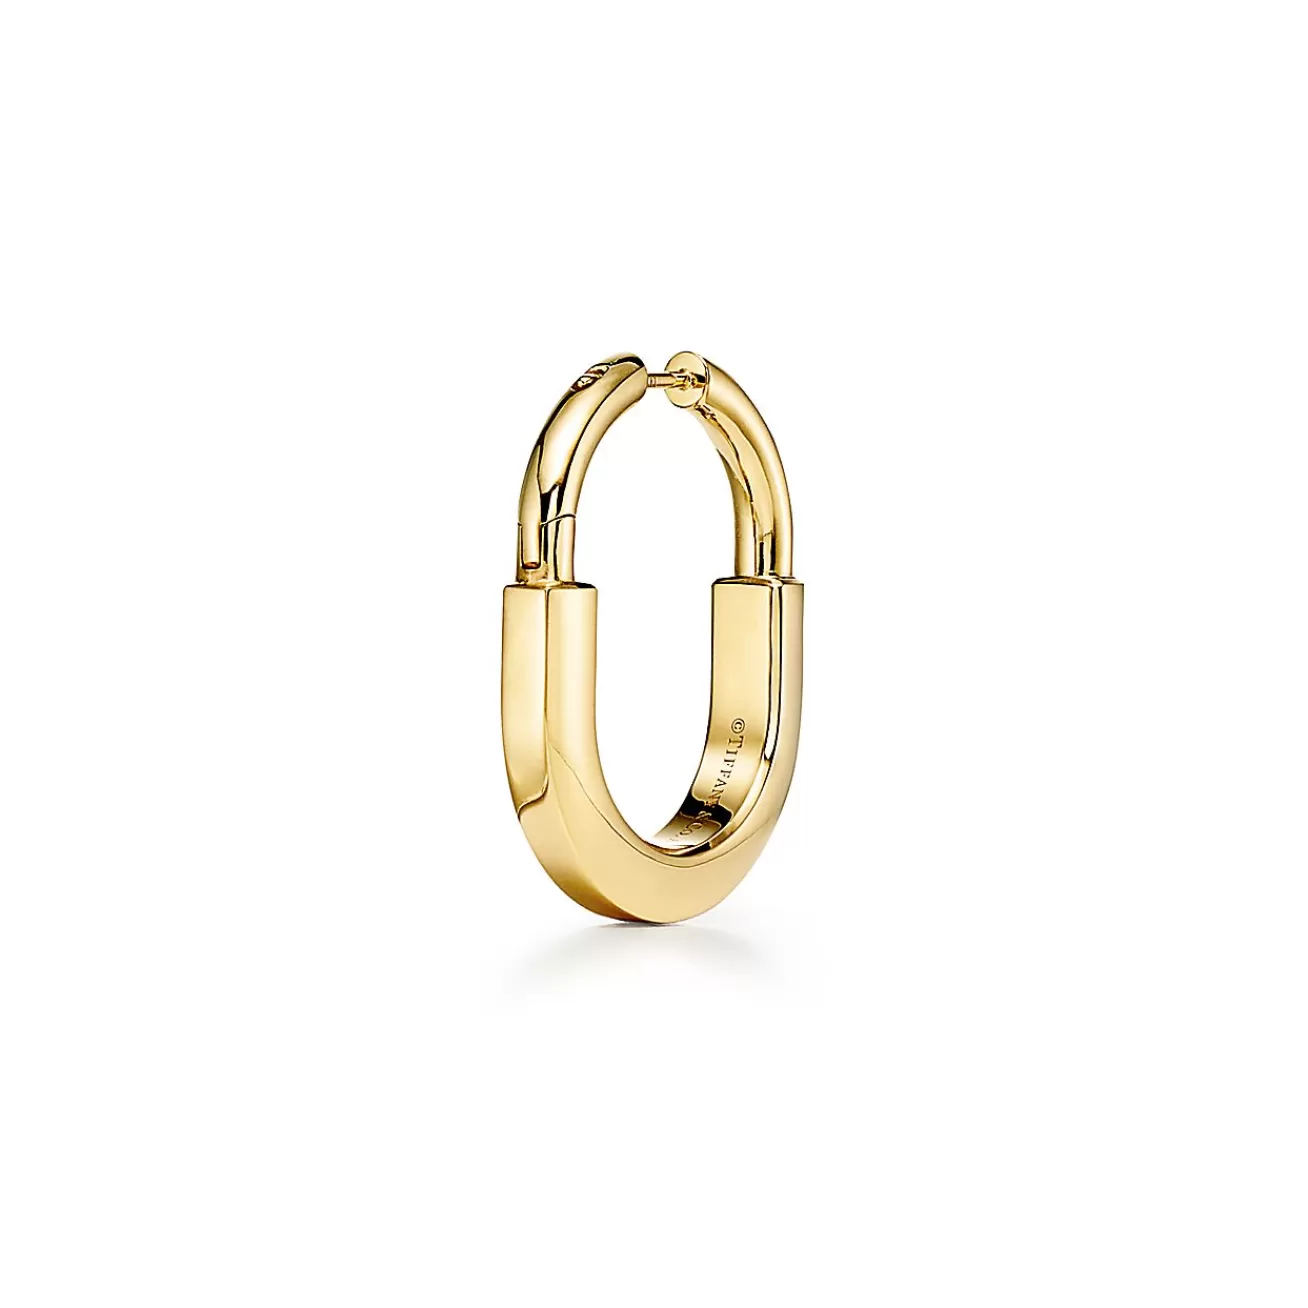 Tiffany & Co. Tiffany Lock Earrings in Yellow Gold with Diamonds, Medium | ^ Earrings | Gifts for Her